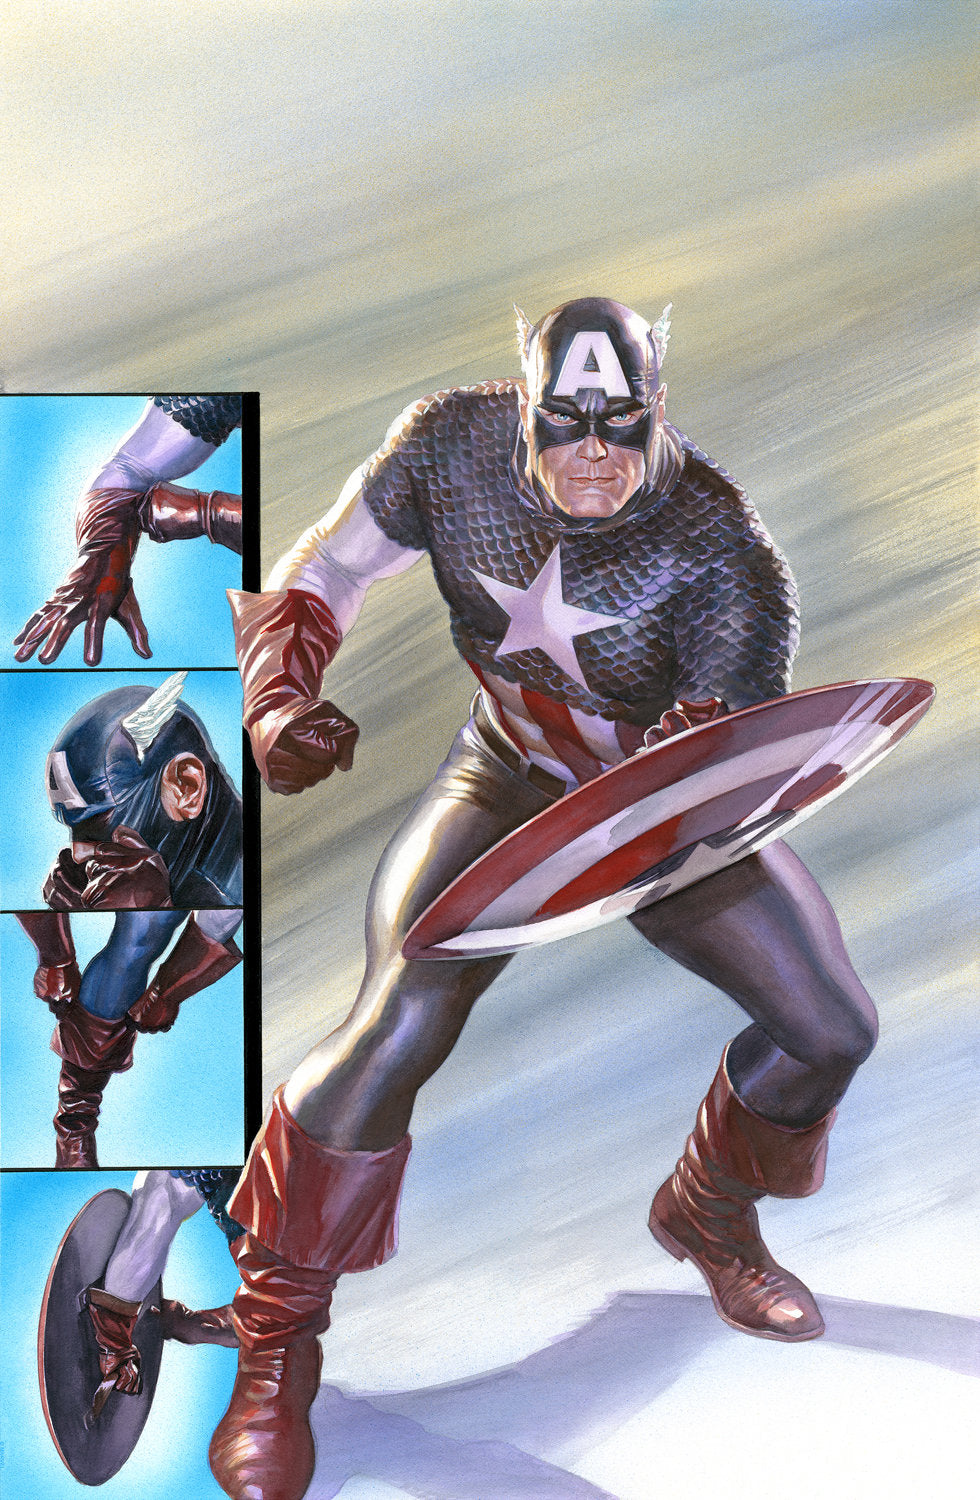 Alex Ross SIGNED Captain America Ready for Battle Giclee on Paper Limited Edition of 25 AP Version